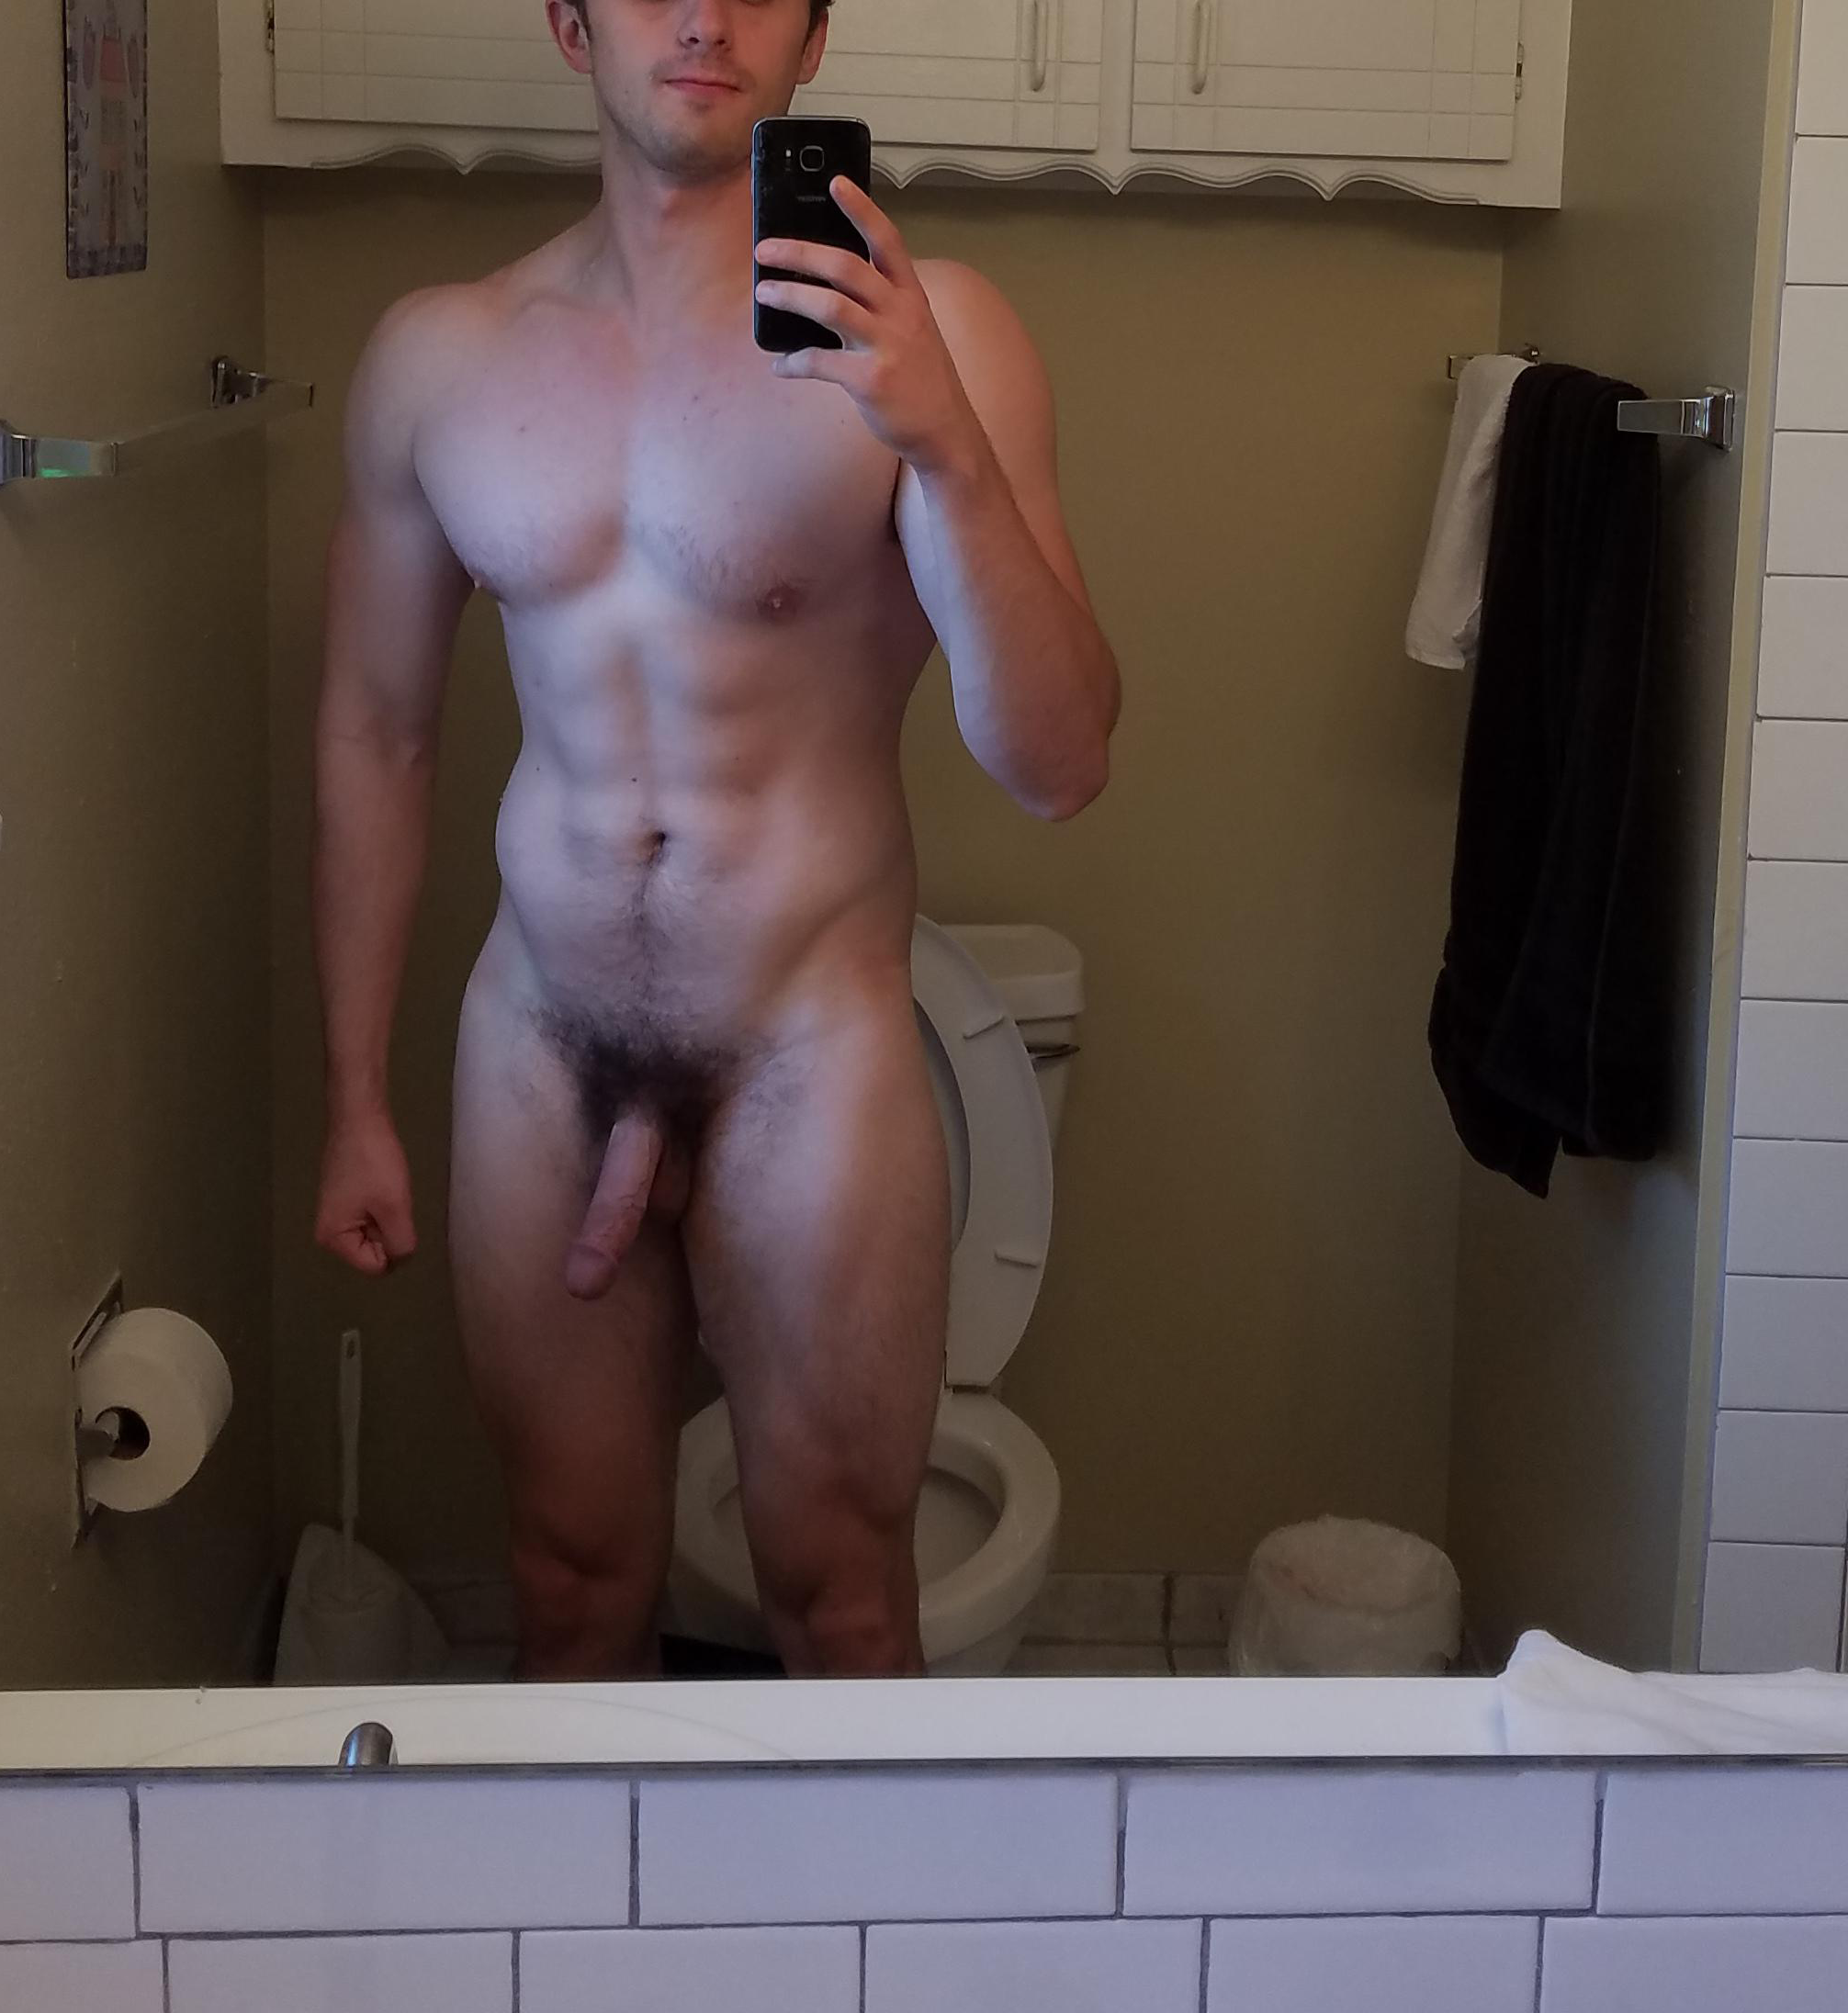 galleries hairy cock selfie free pics and video